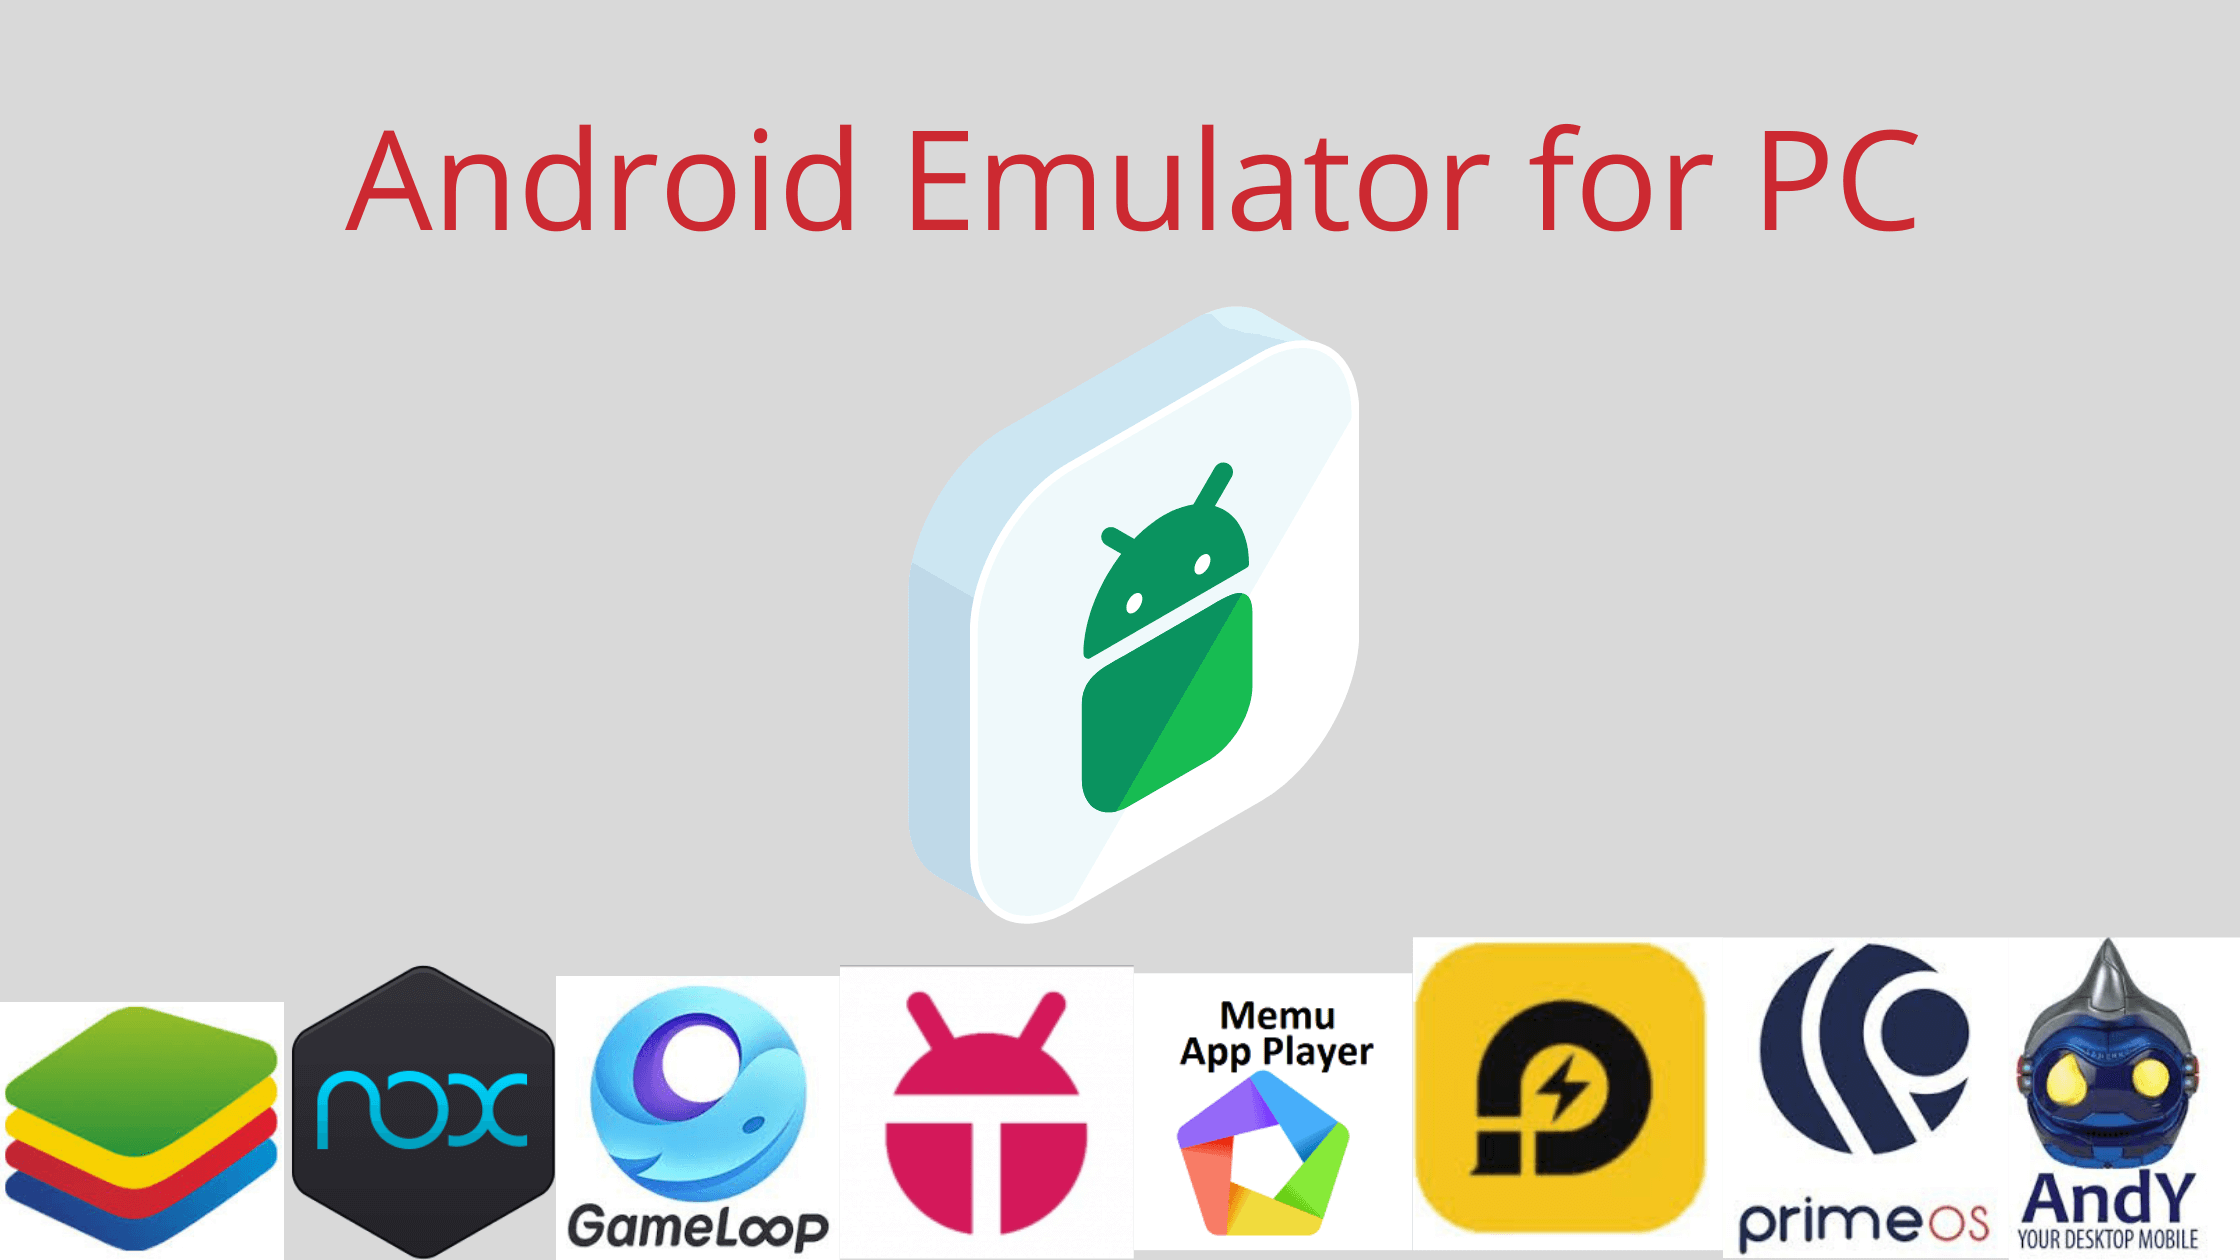 the best android emulator for mac